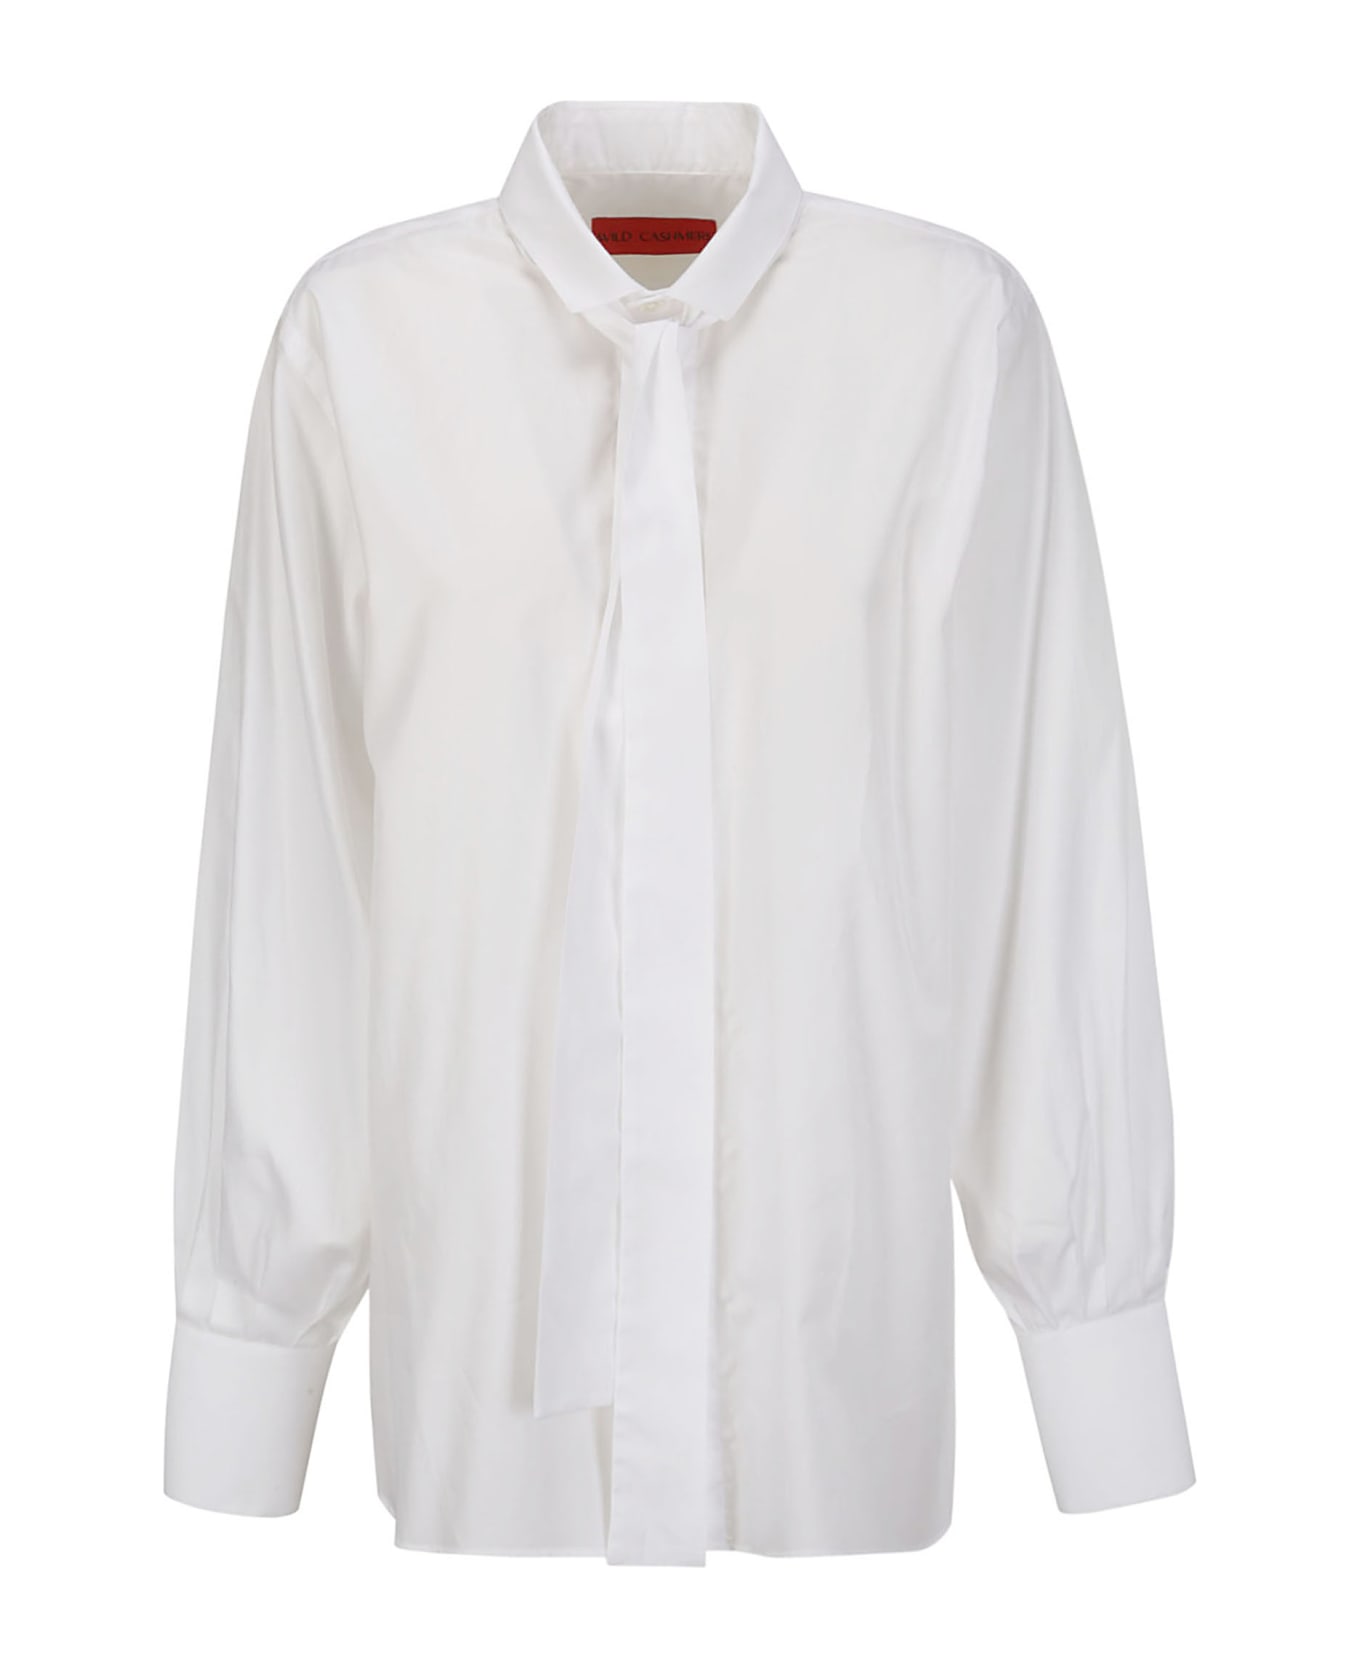 Wild Cashmere Shirt With Hidden Buttons - OFF-WHITE